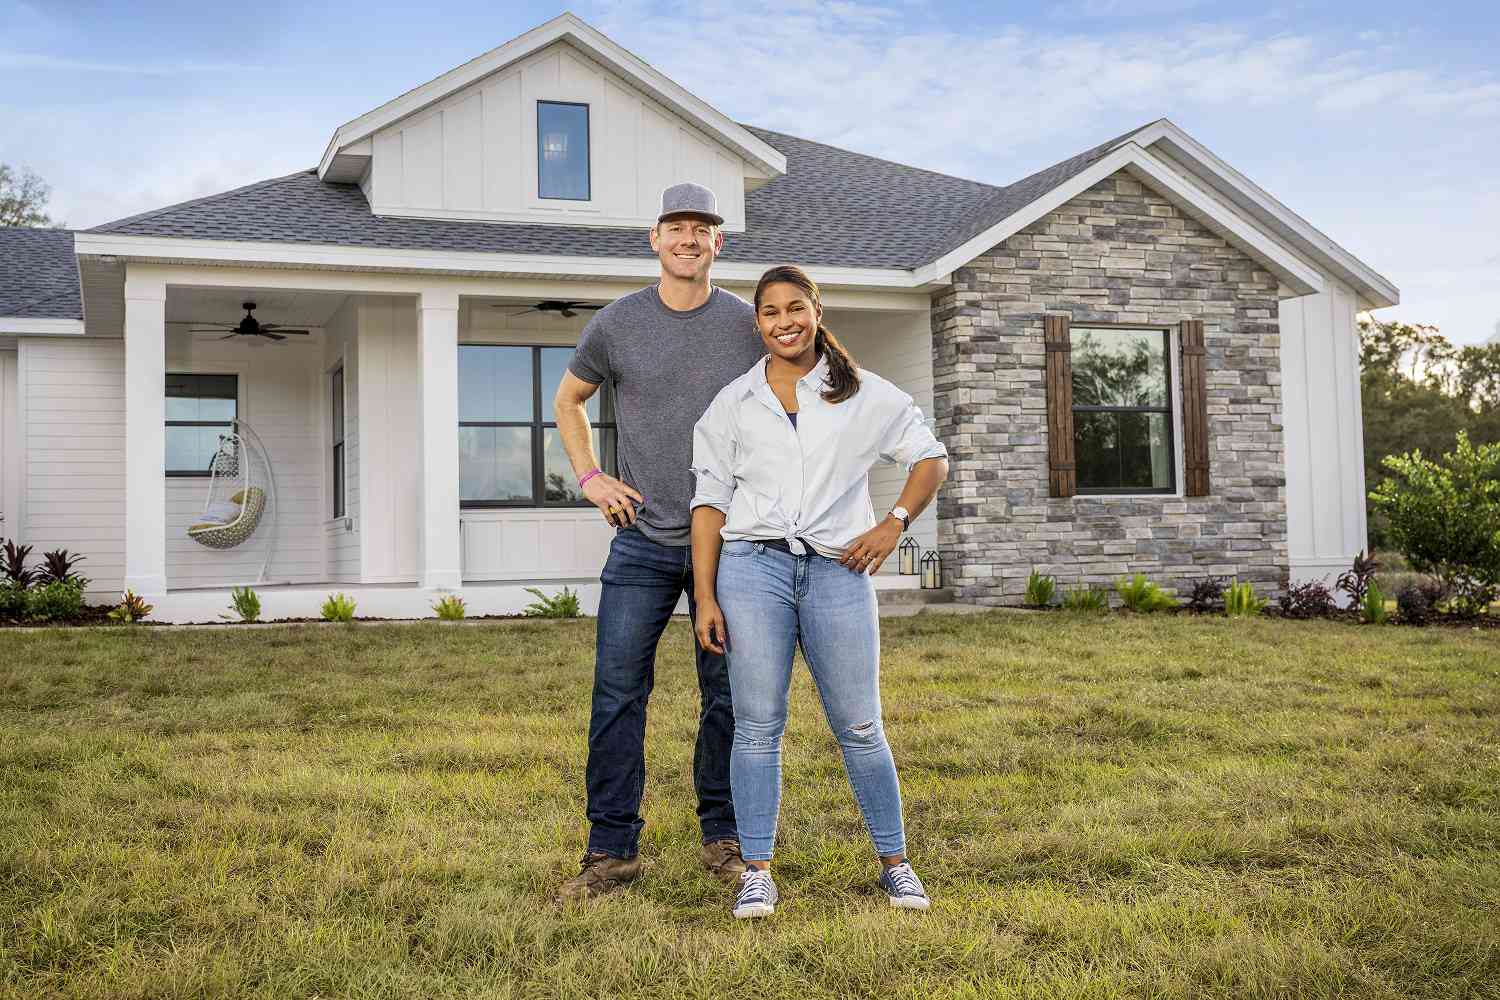 How To Get On Home Renovation Shows